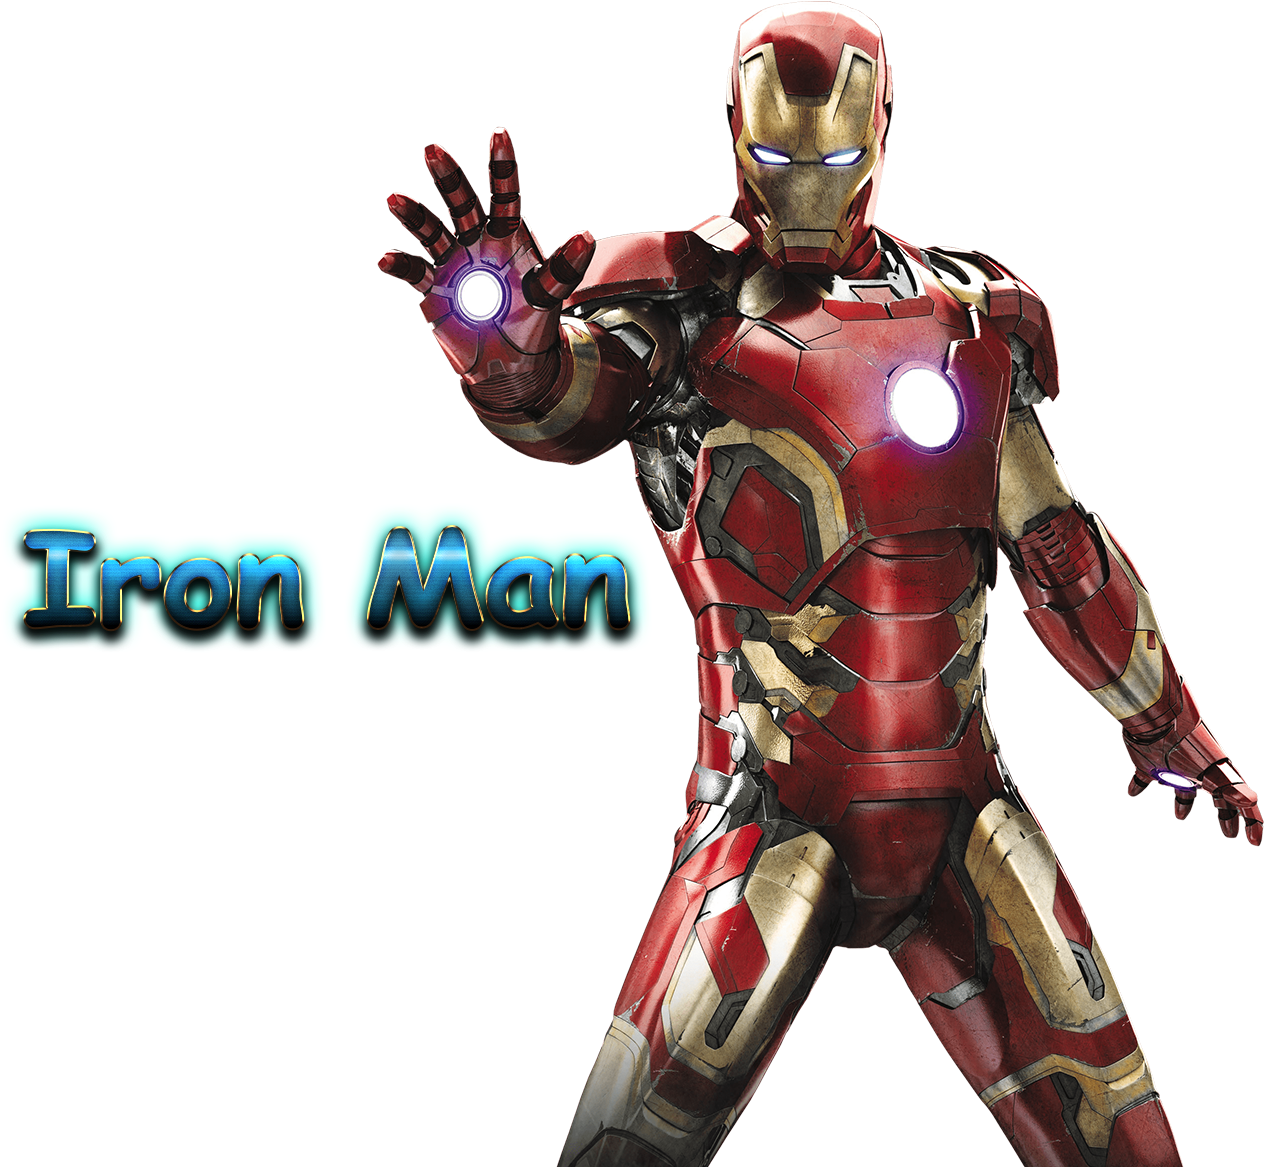 MARVEL INFINITY GUARR Iron Man Image PNG